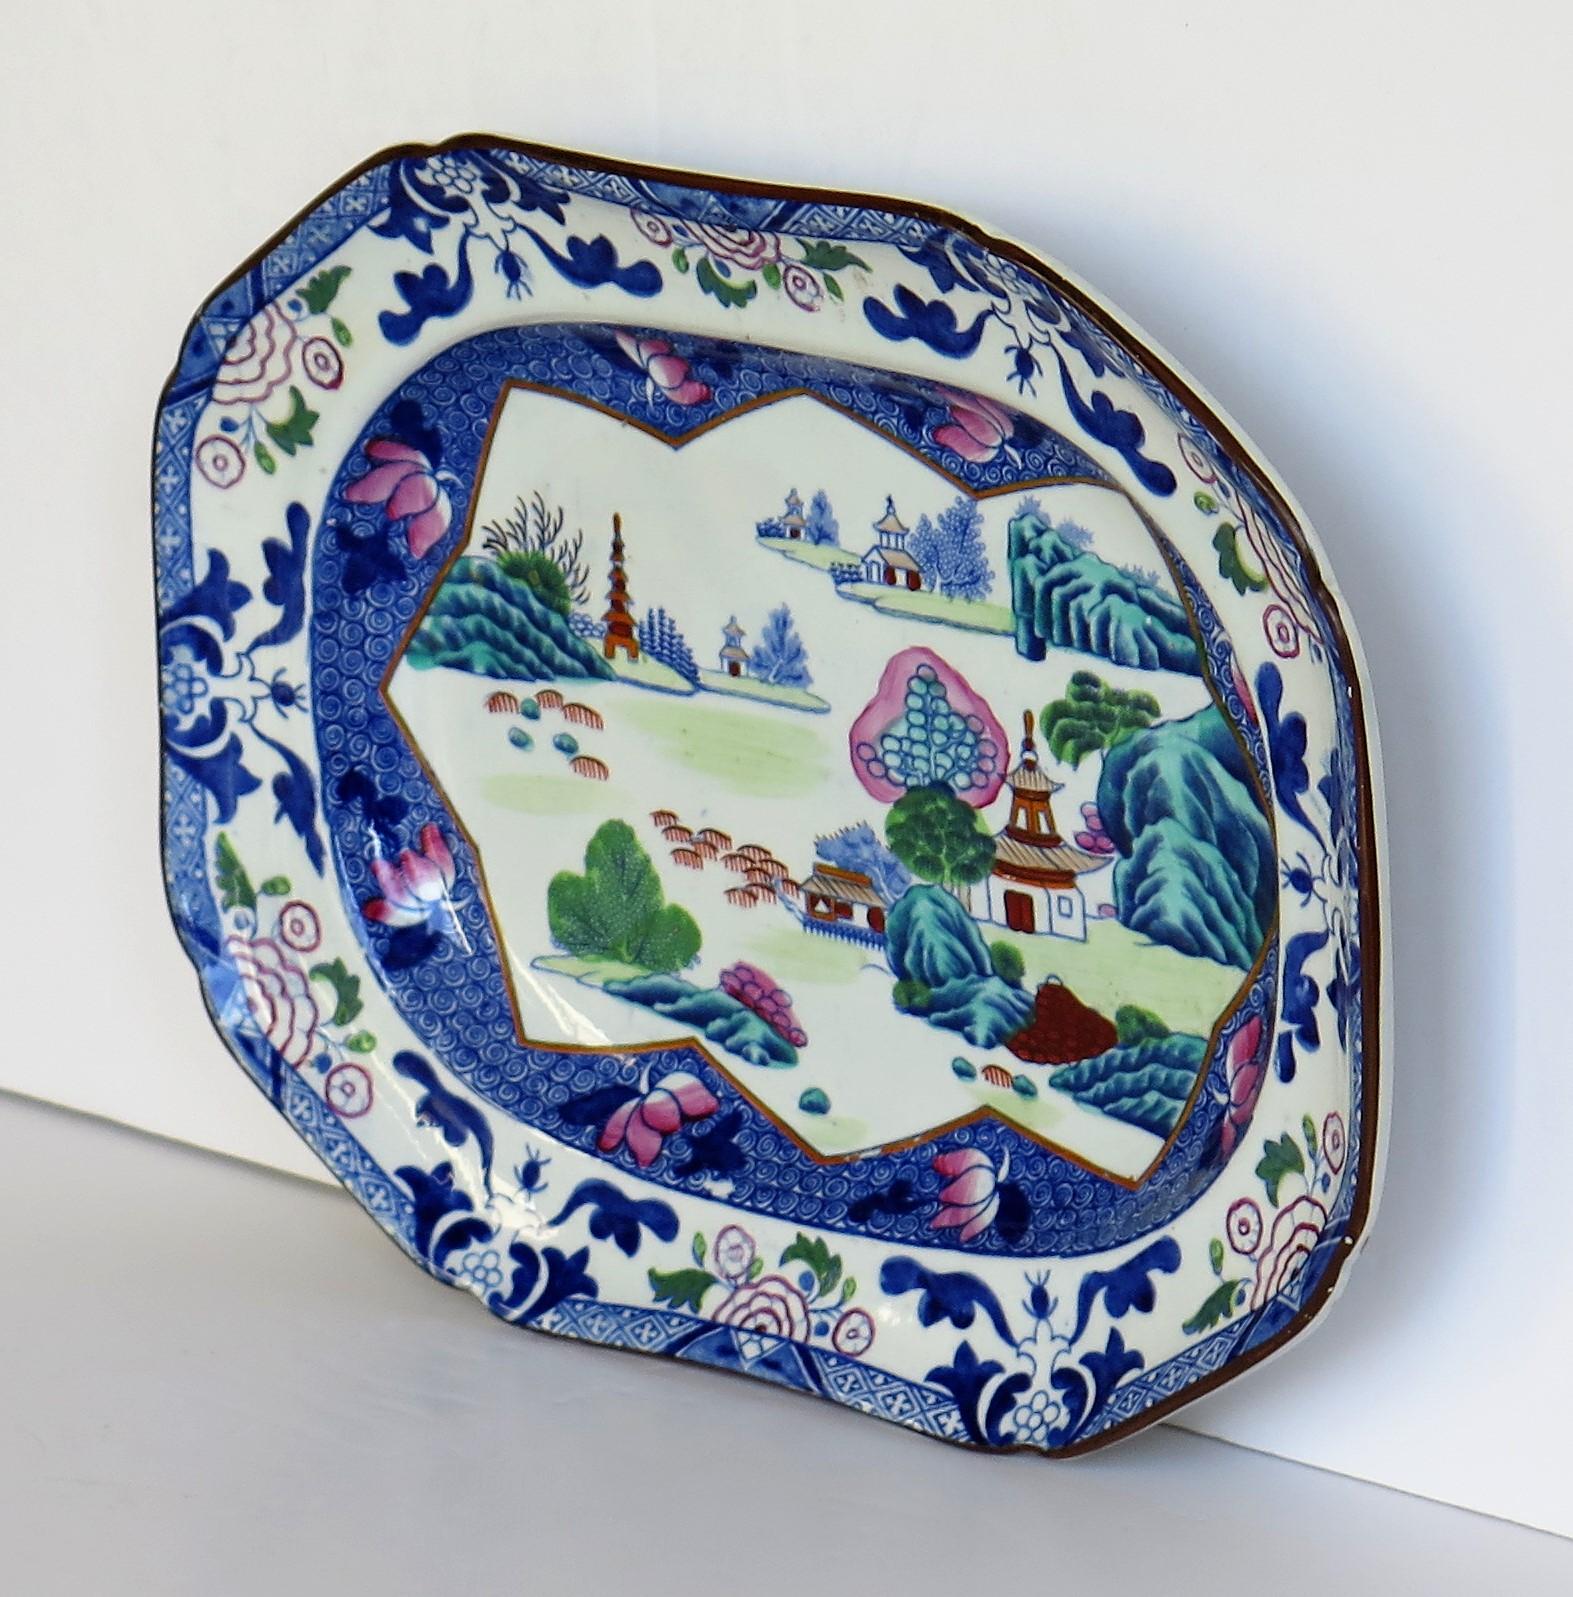 Chinoiserie Georgian Ironstone Platter by Hicks & Meigh in Chinese Landscape Ptn, circa 1818